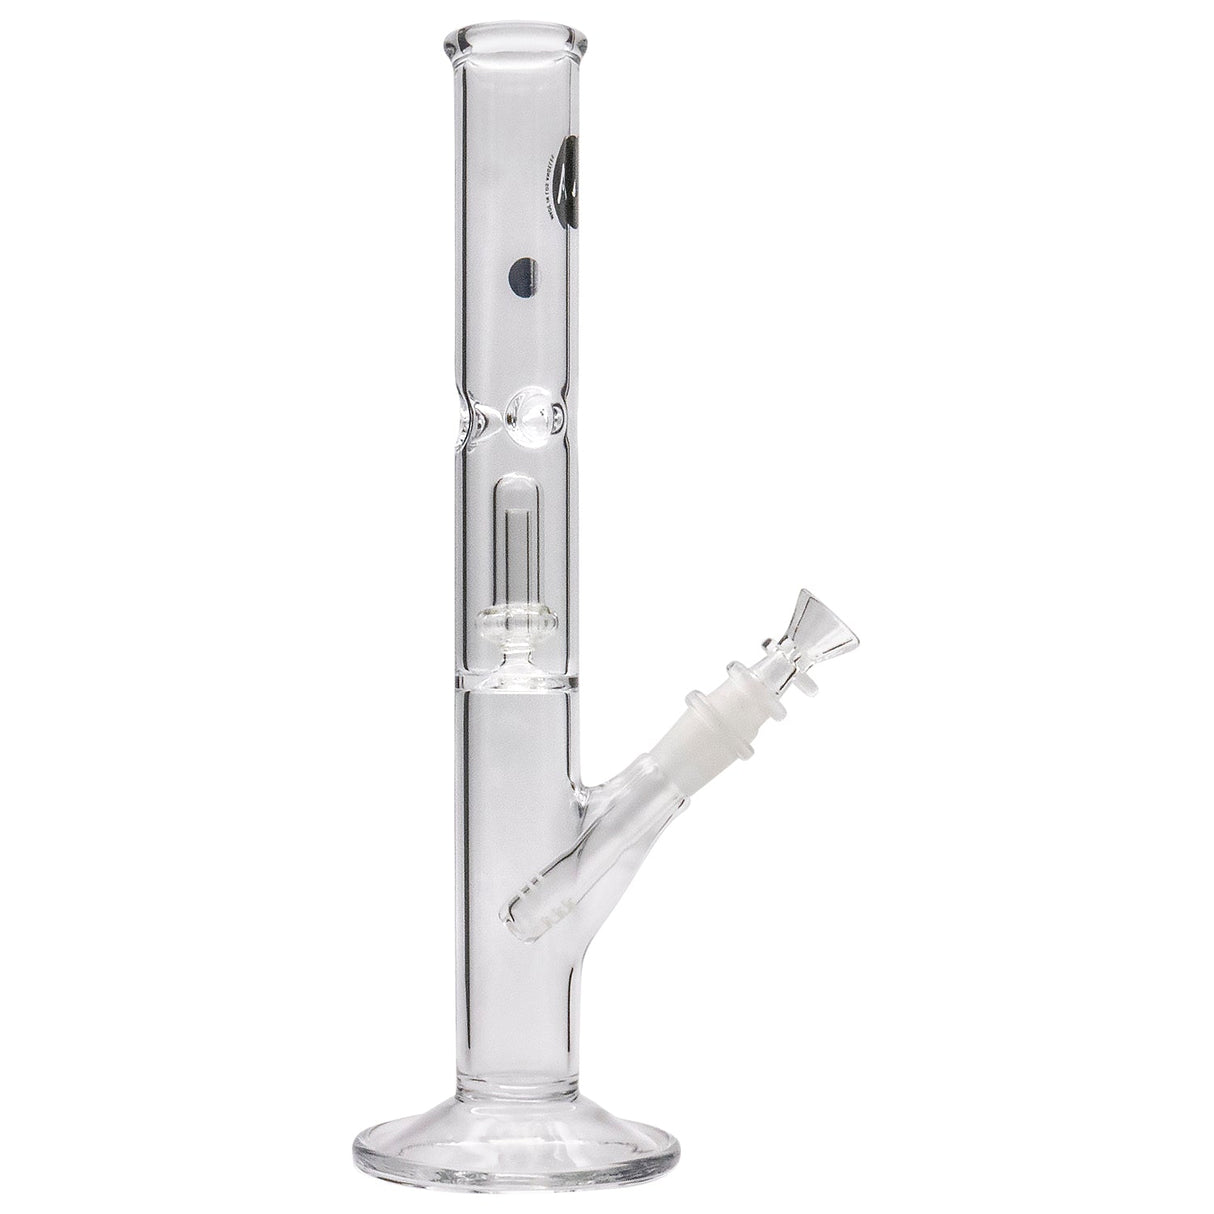 LA Pipes Straight Bong with Single Showerhead Perc, 18mm Female Joint, Front View